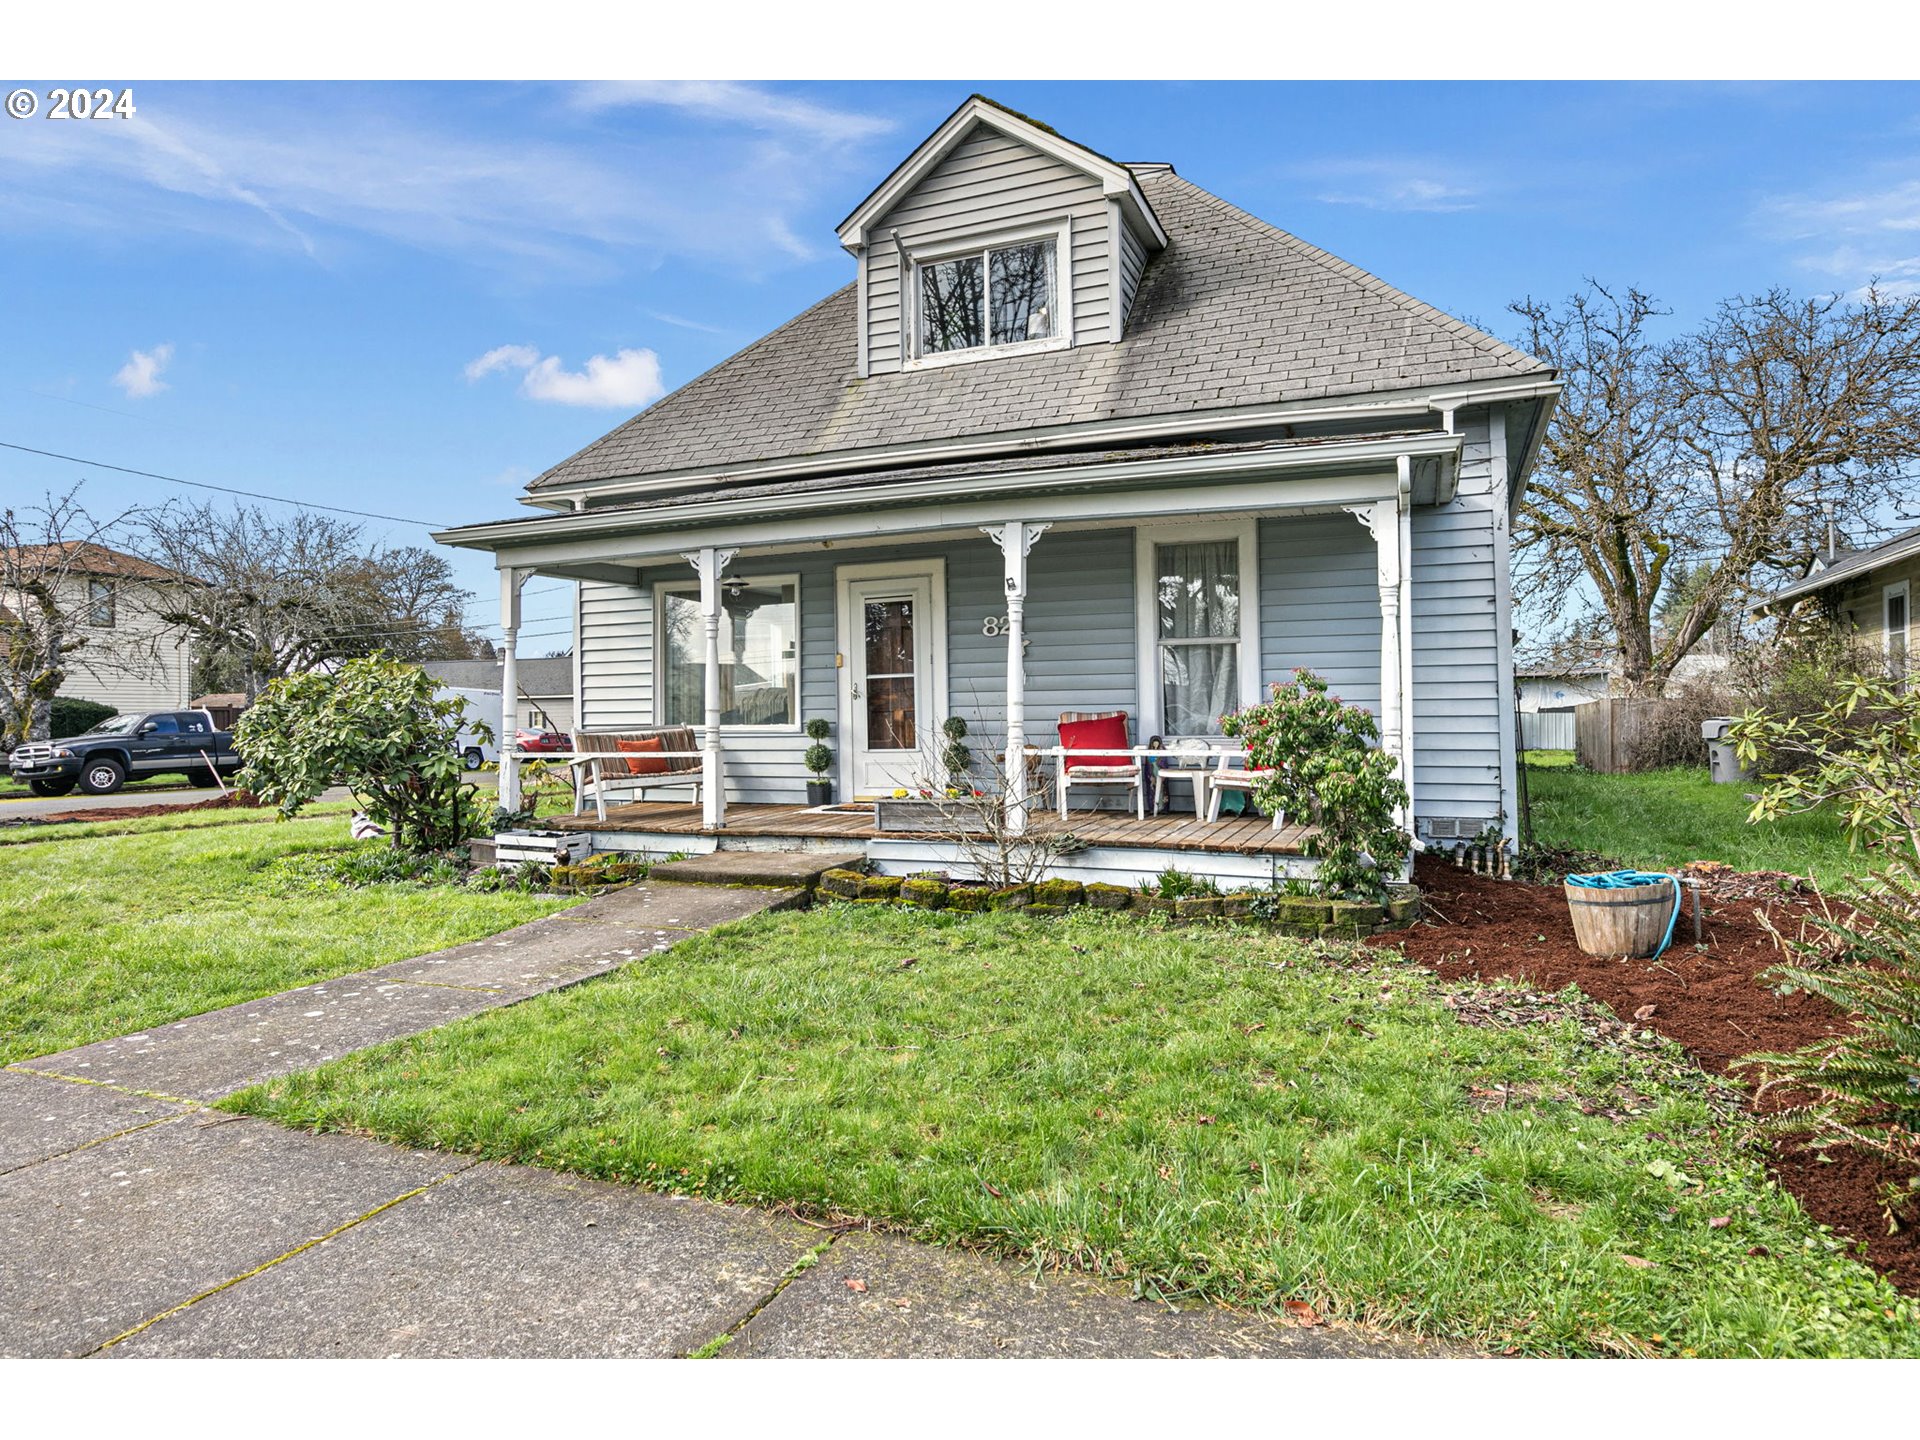 821 MAPLE ST, Junction City, OR 